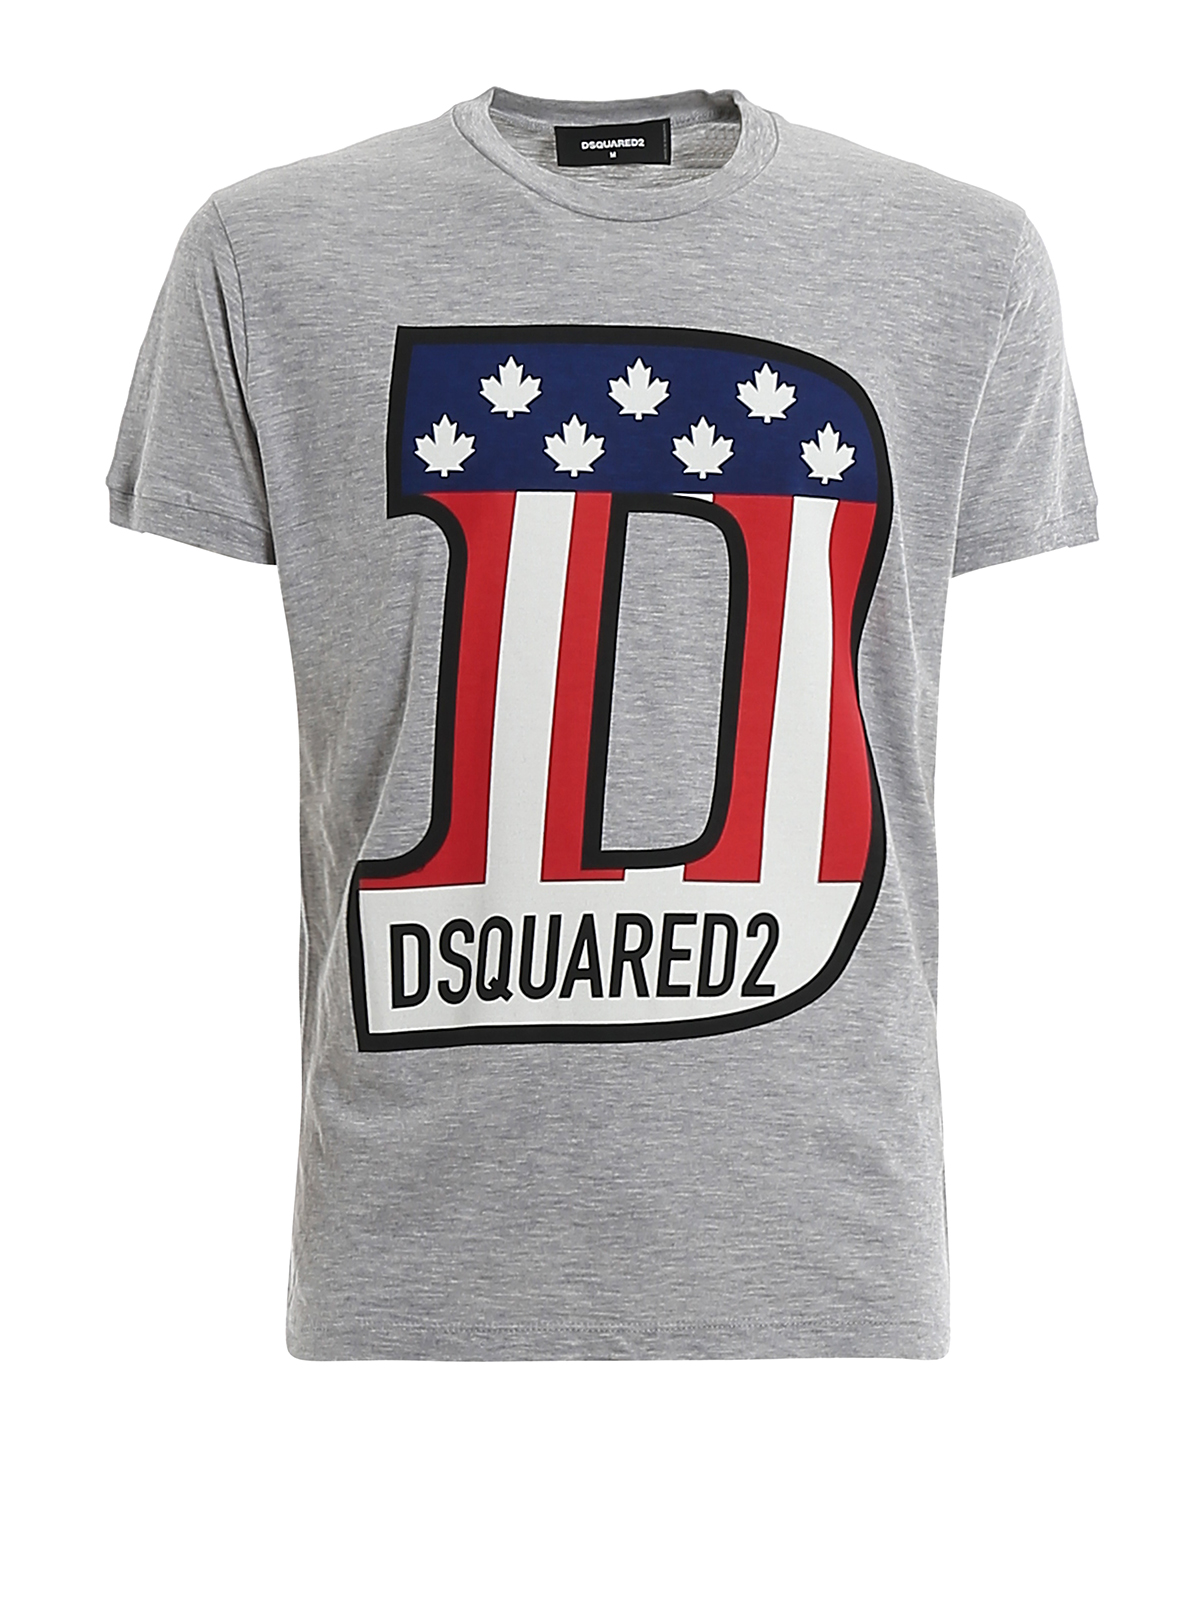 dsquared all but the flag t shirt